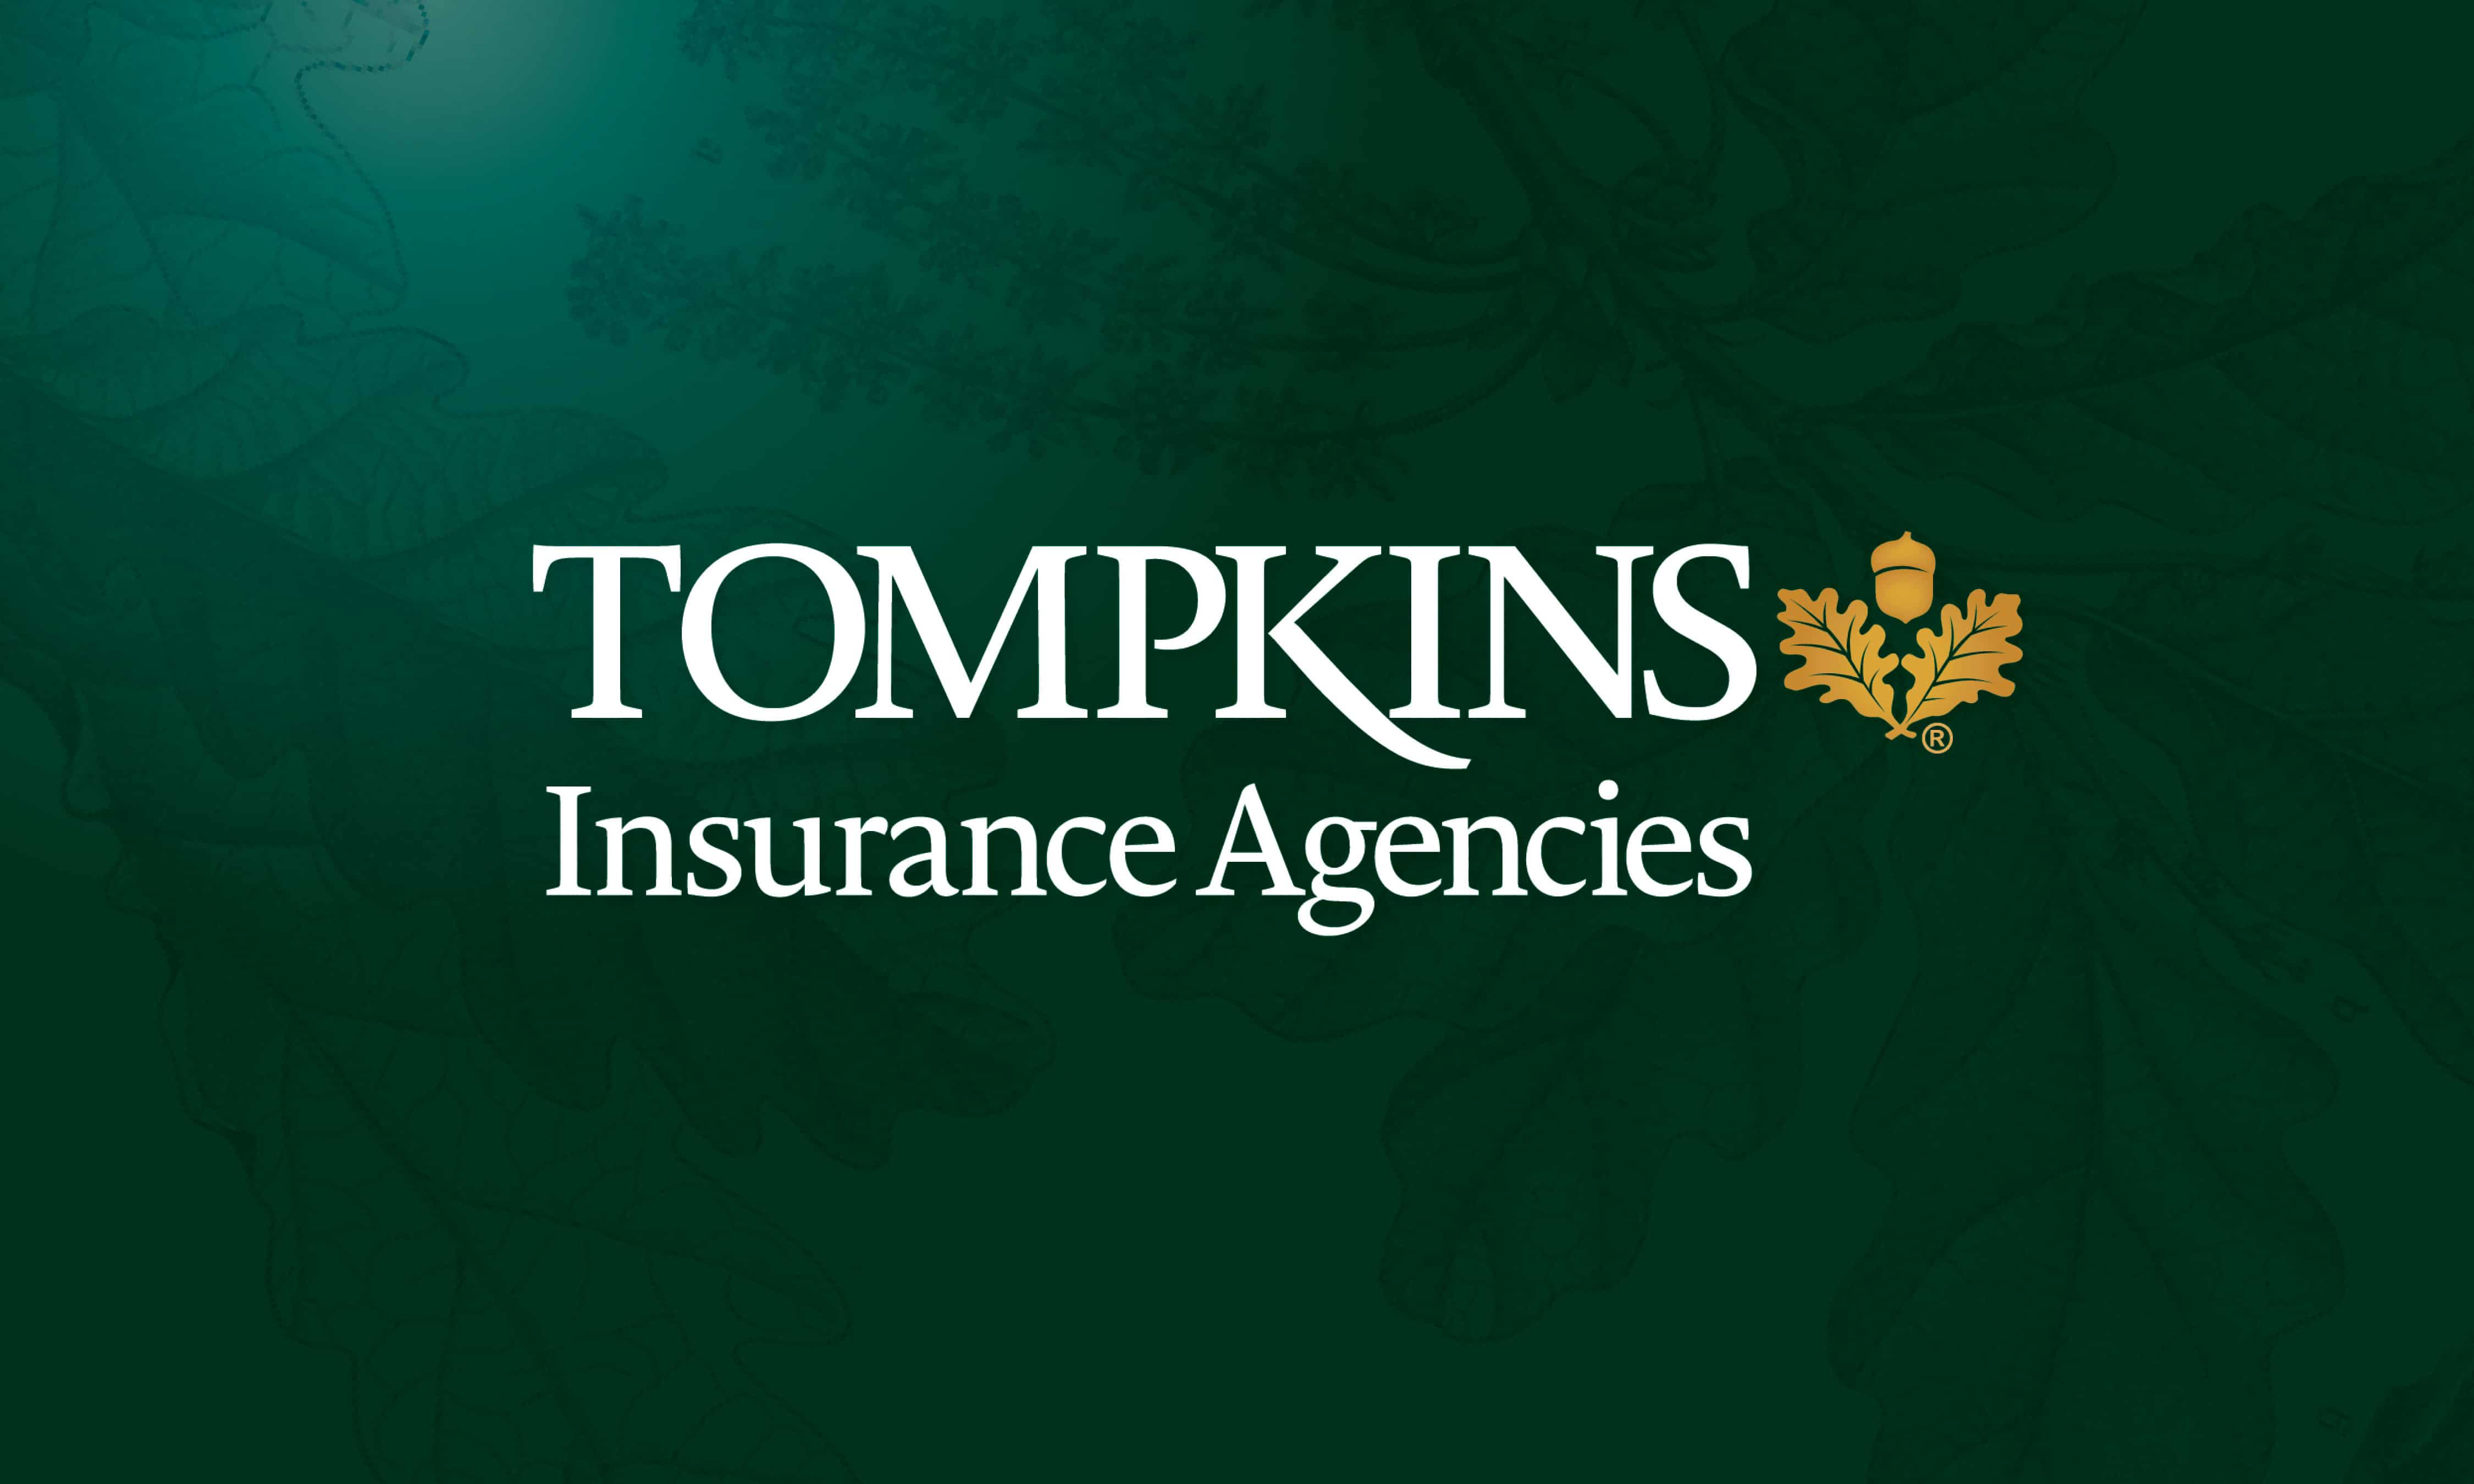 Tompkins Insurance Retains Status as “Best Practices” Agency